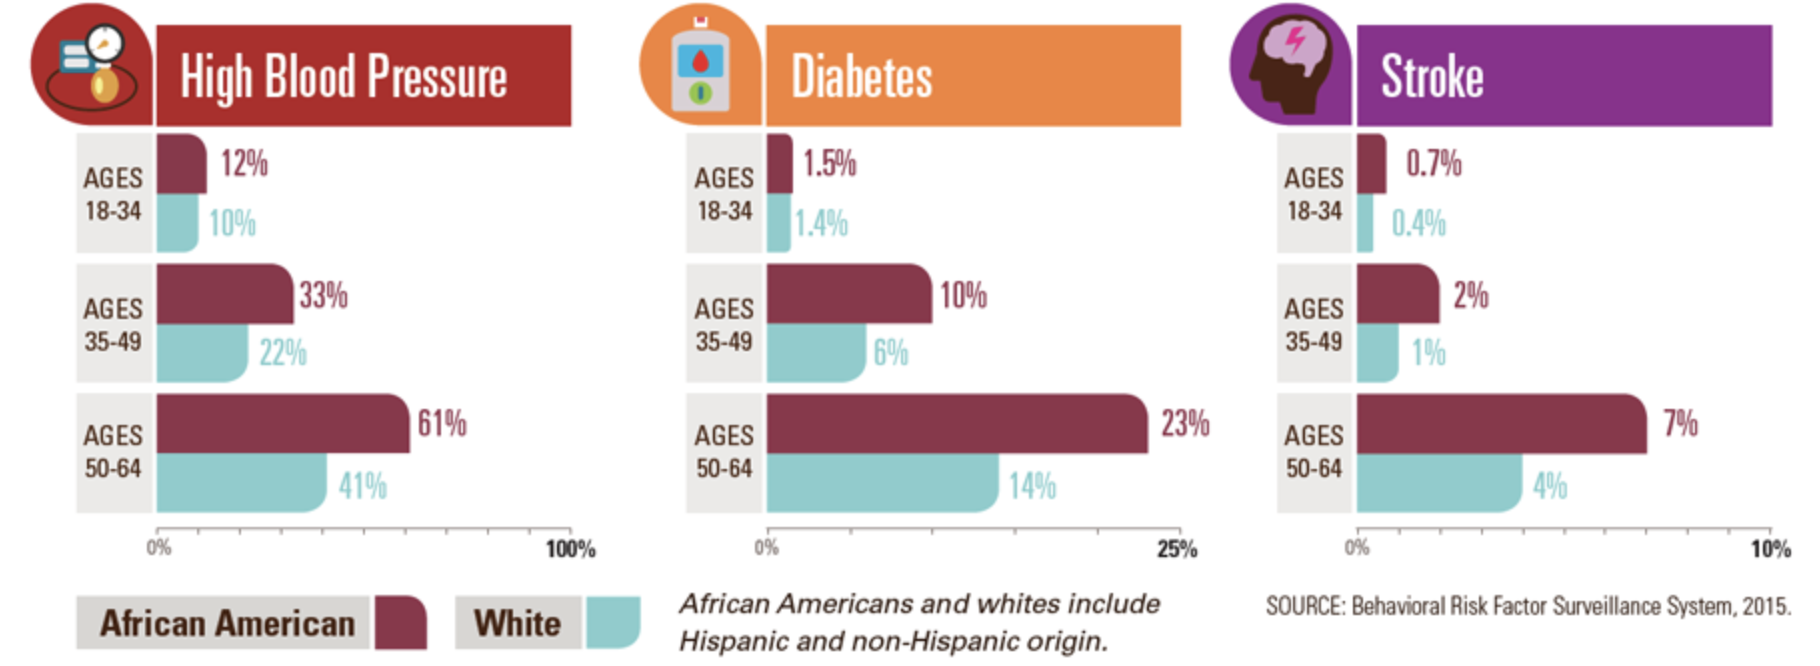 Rate of hypertension, diabetes, and stroke in Blacks of both of Hispanic and non-Hispanic origin

Source: CDC